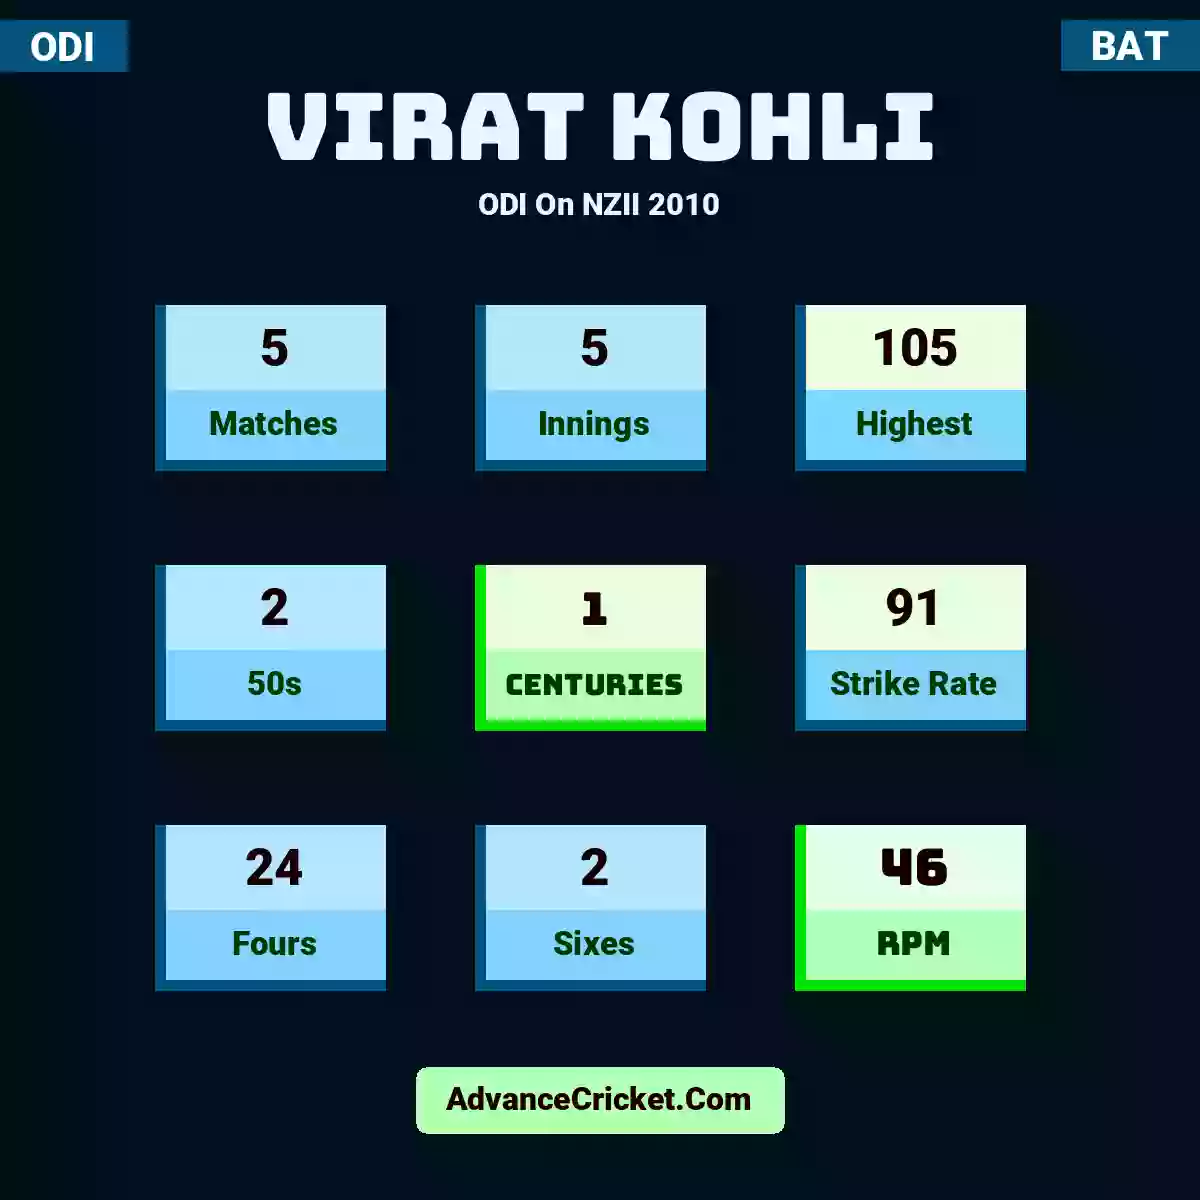 Virat Kohli ODI  On NZII 2010, Virat Kohli played 5 matches, scored 105 runs as highest, 2 half-centuries, and 1 centuries, with a strike rate of 91. V.Kohli hit 24 fours and 2 sixes, with an RPM of 46.